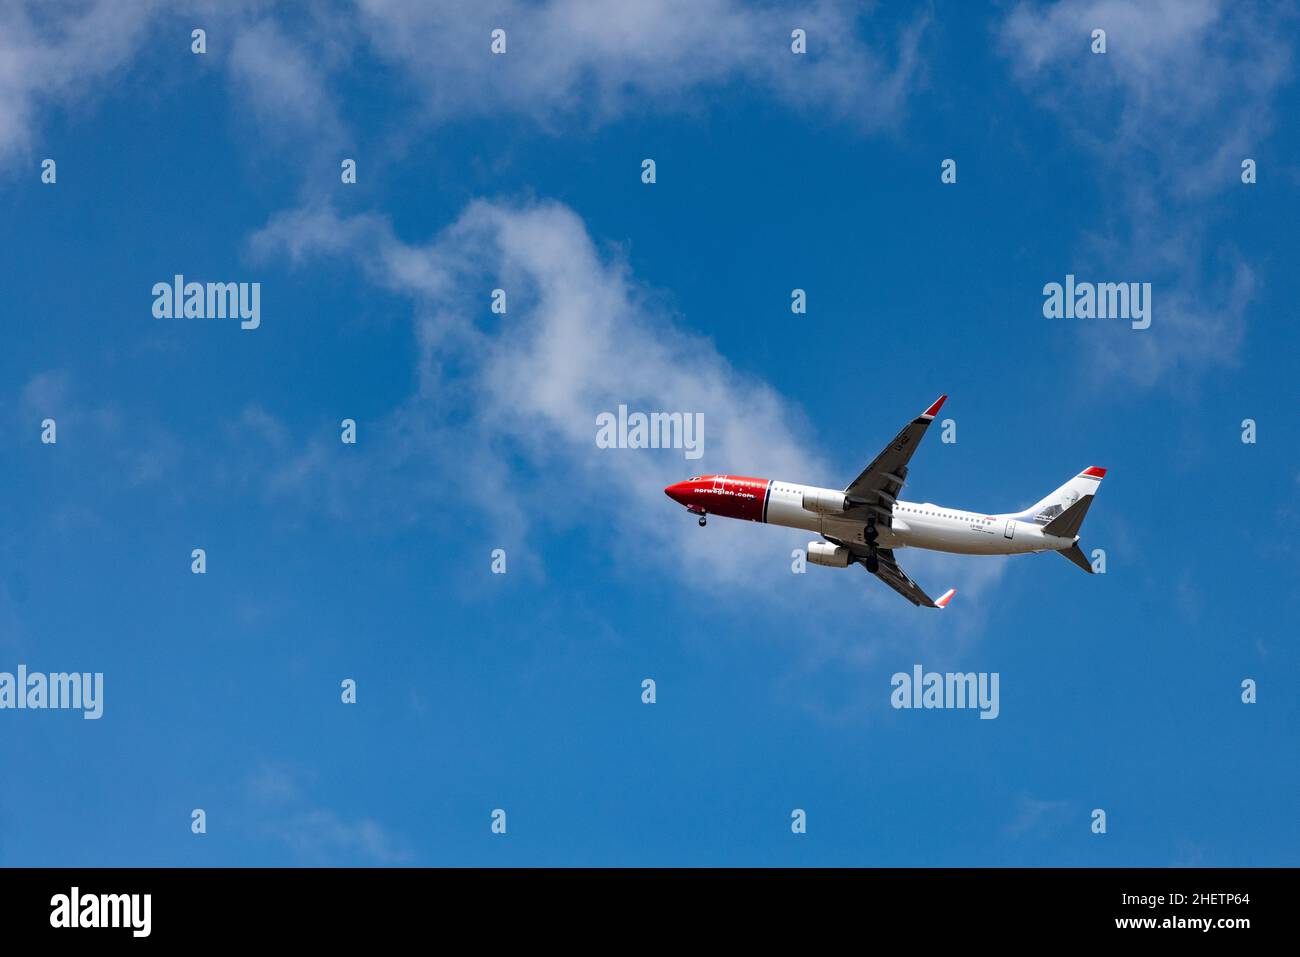 An airplane is seen flying Stock Photo